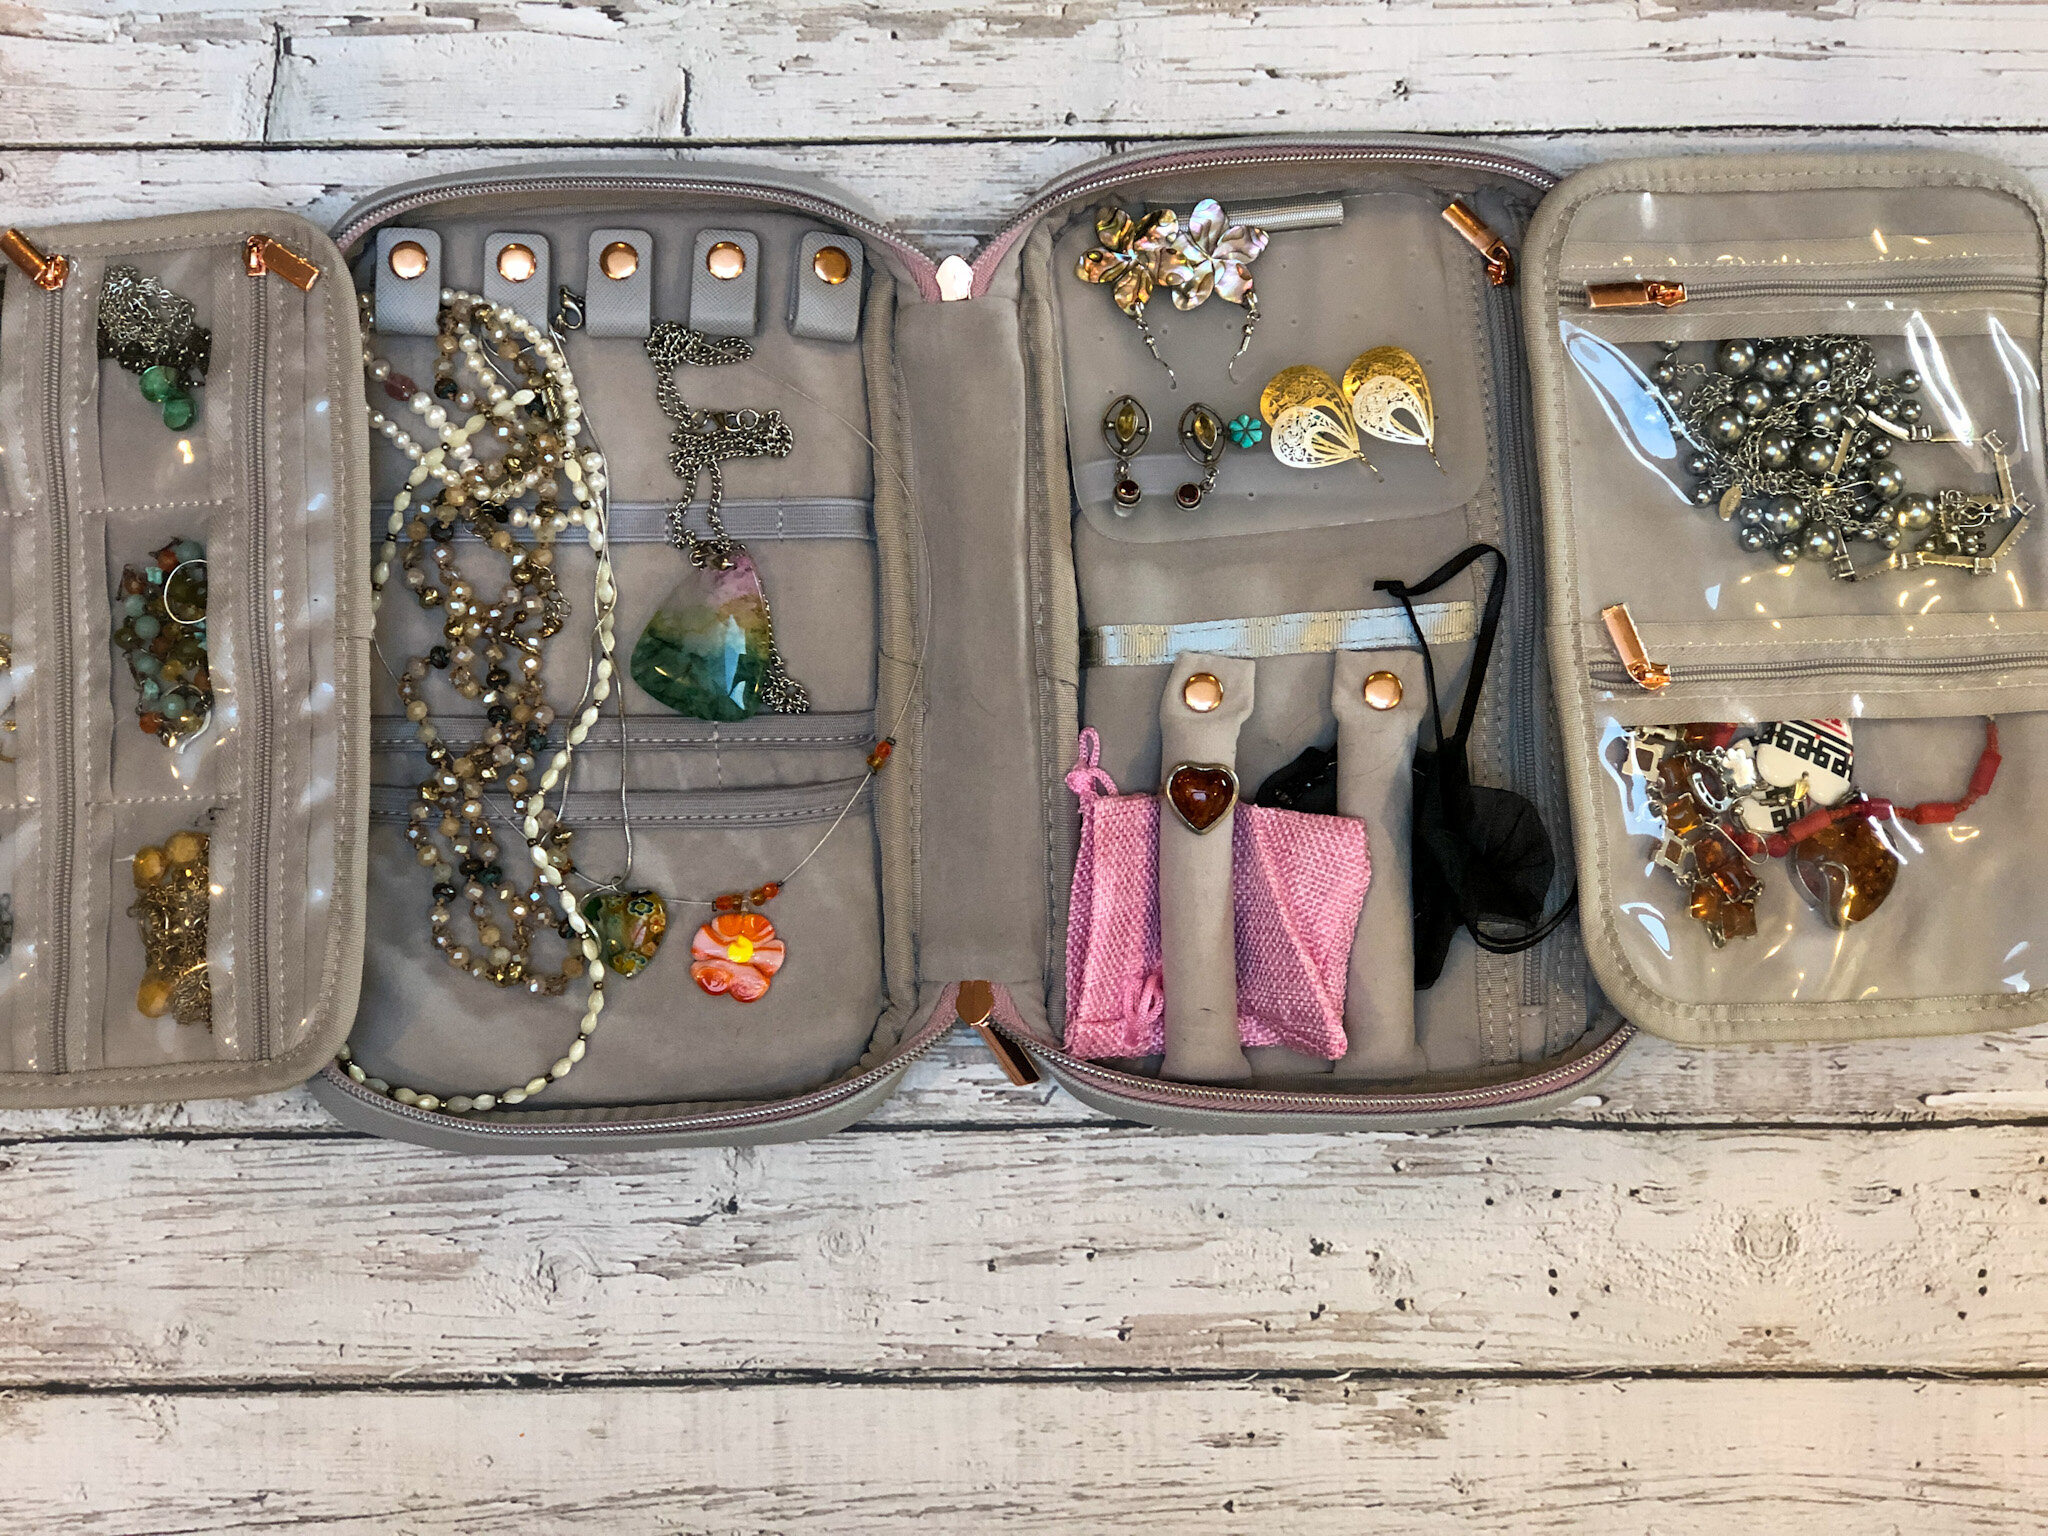 Unique gifts for travelers: jewelry case